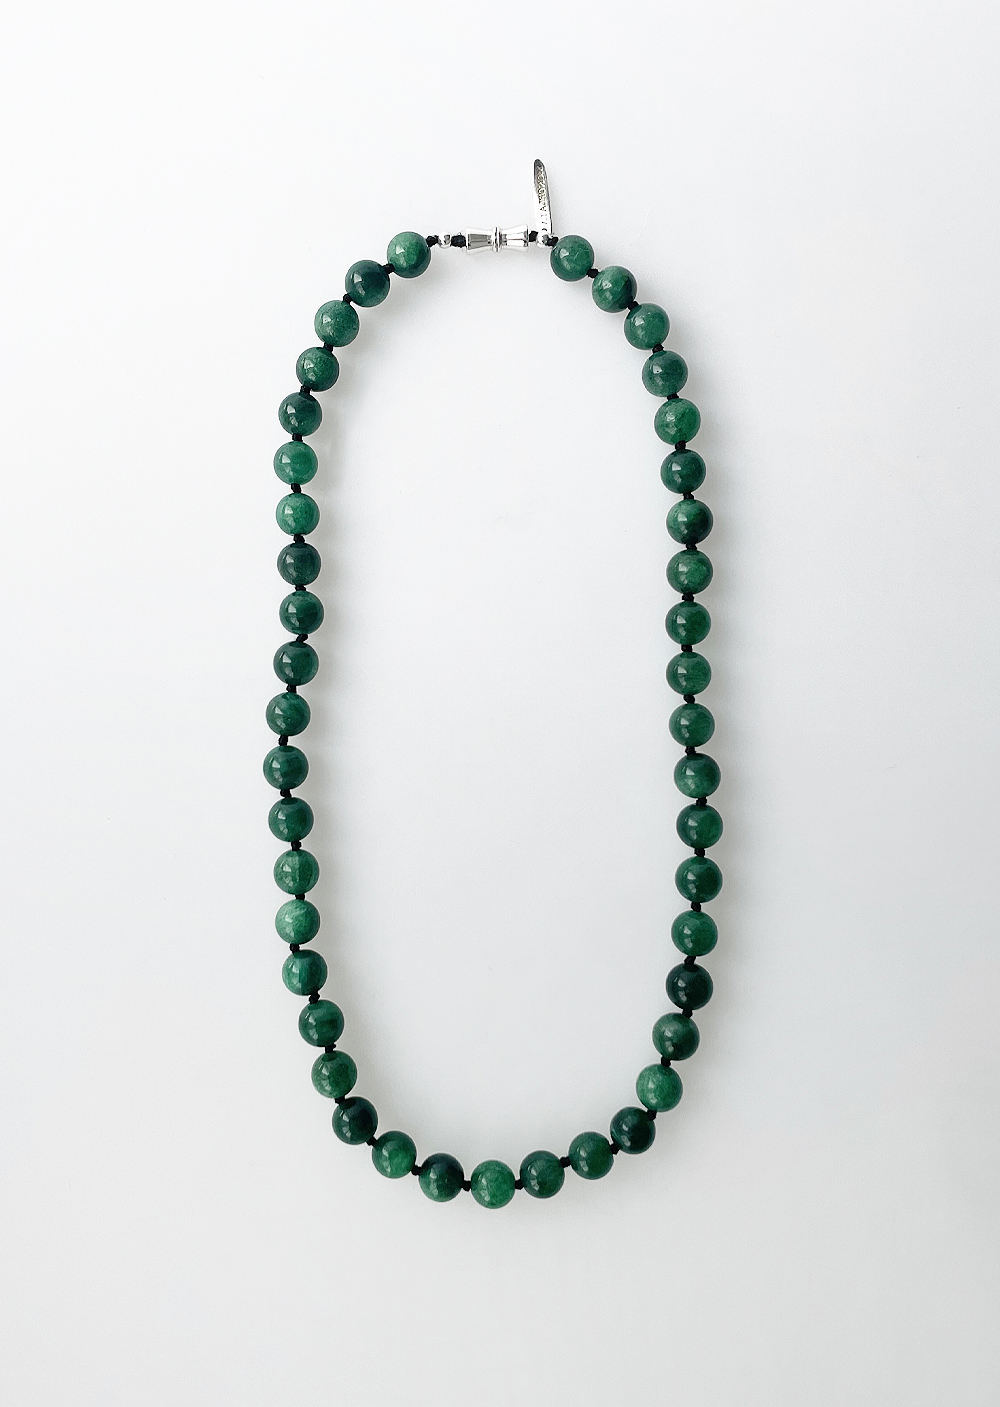 [ONLY ONE] 에메랄드볼(8mm) 목걸이 [emerald ball knotted necklace]